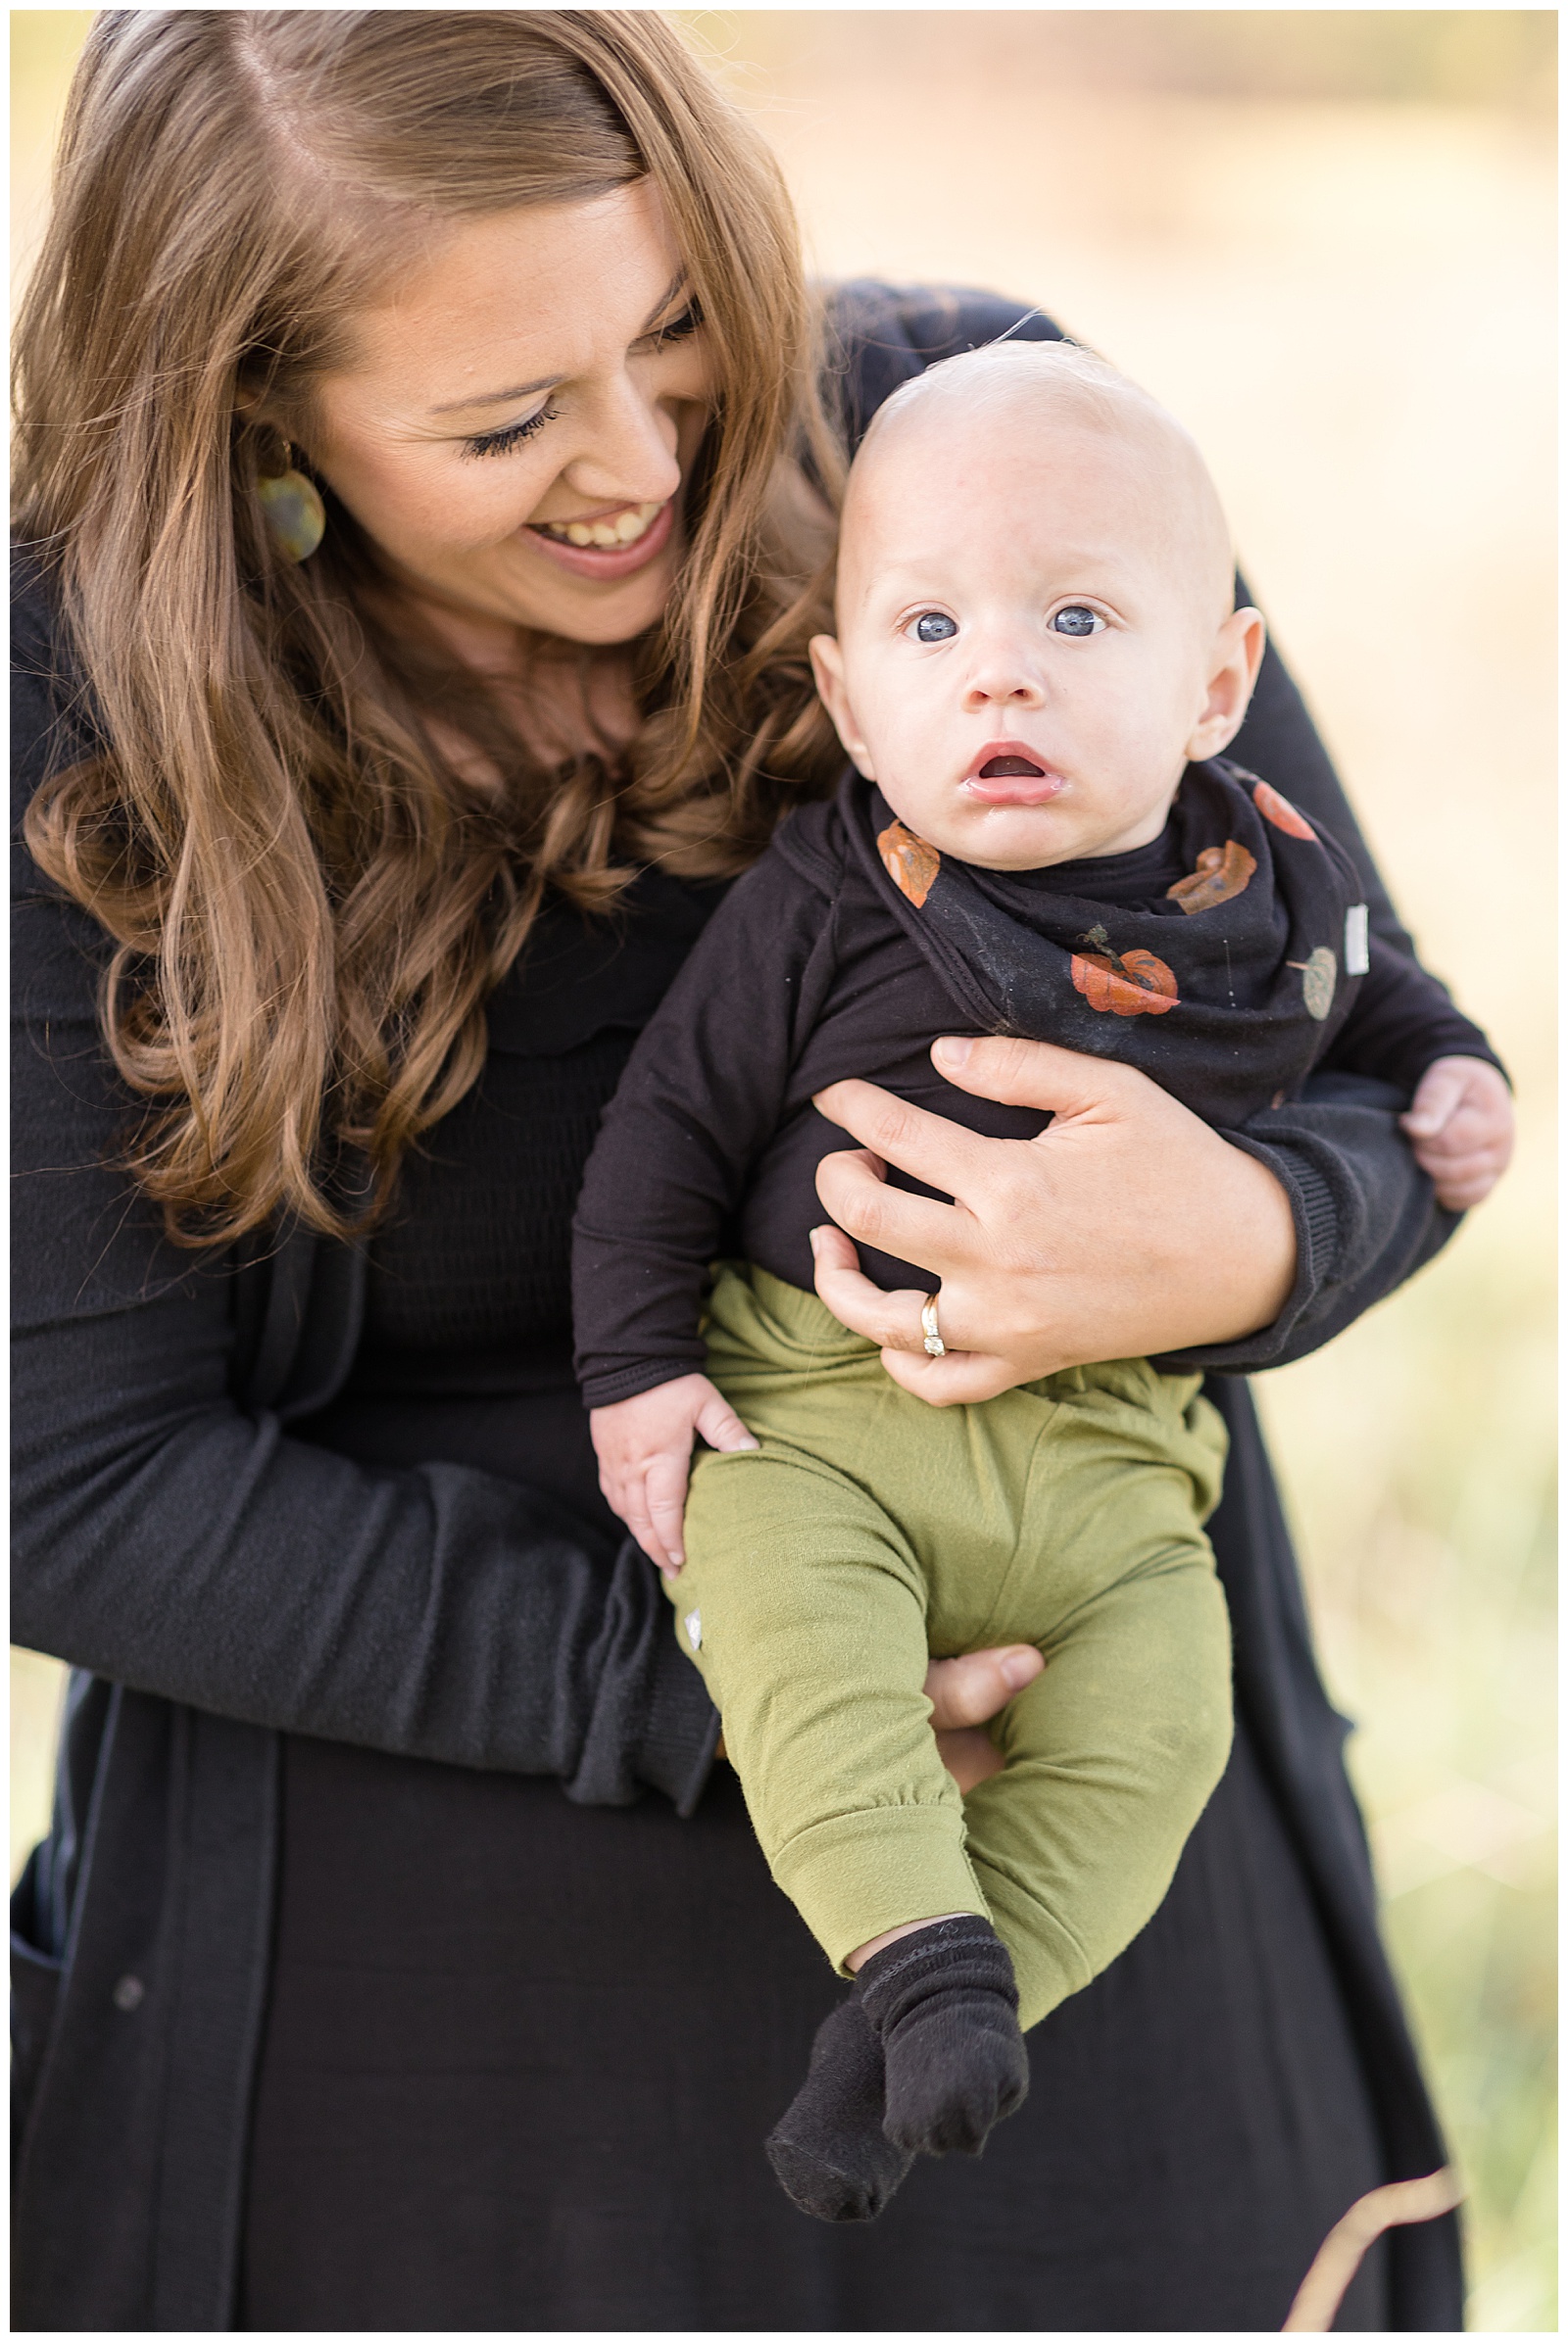 Mom, who is wearing a black dress and black cardigan, holds baby son who is wearing green pants and a black shirt with a pumpkin bib as he looks at camera with baby blue eyes.